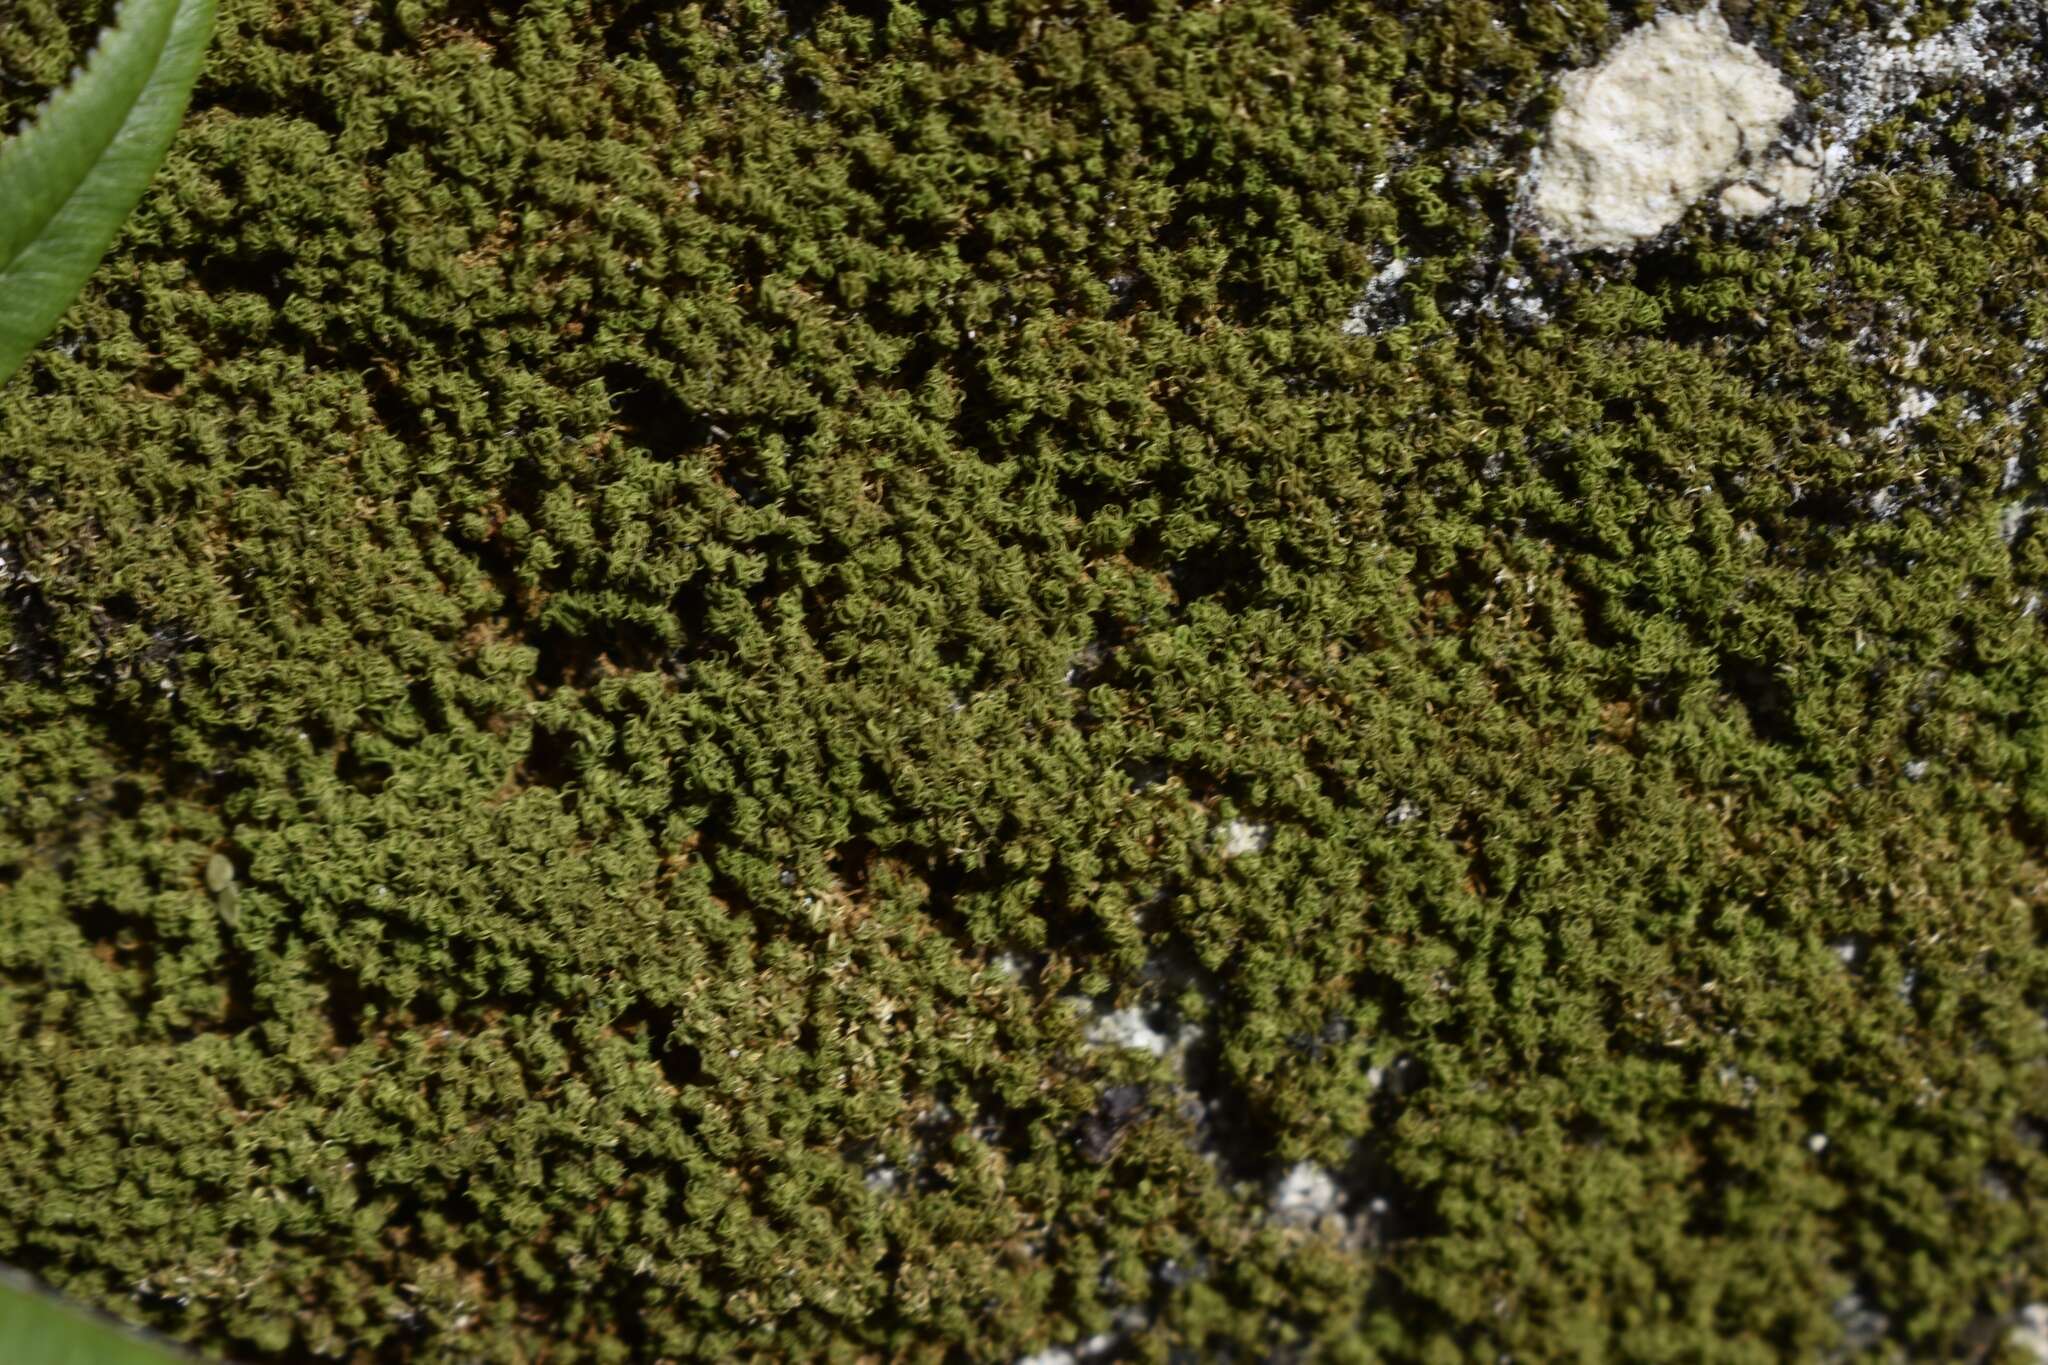 Image of Jamaican weissia moss